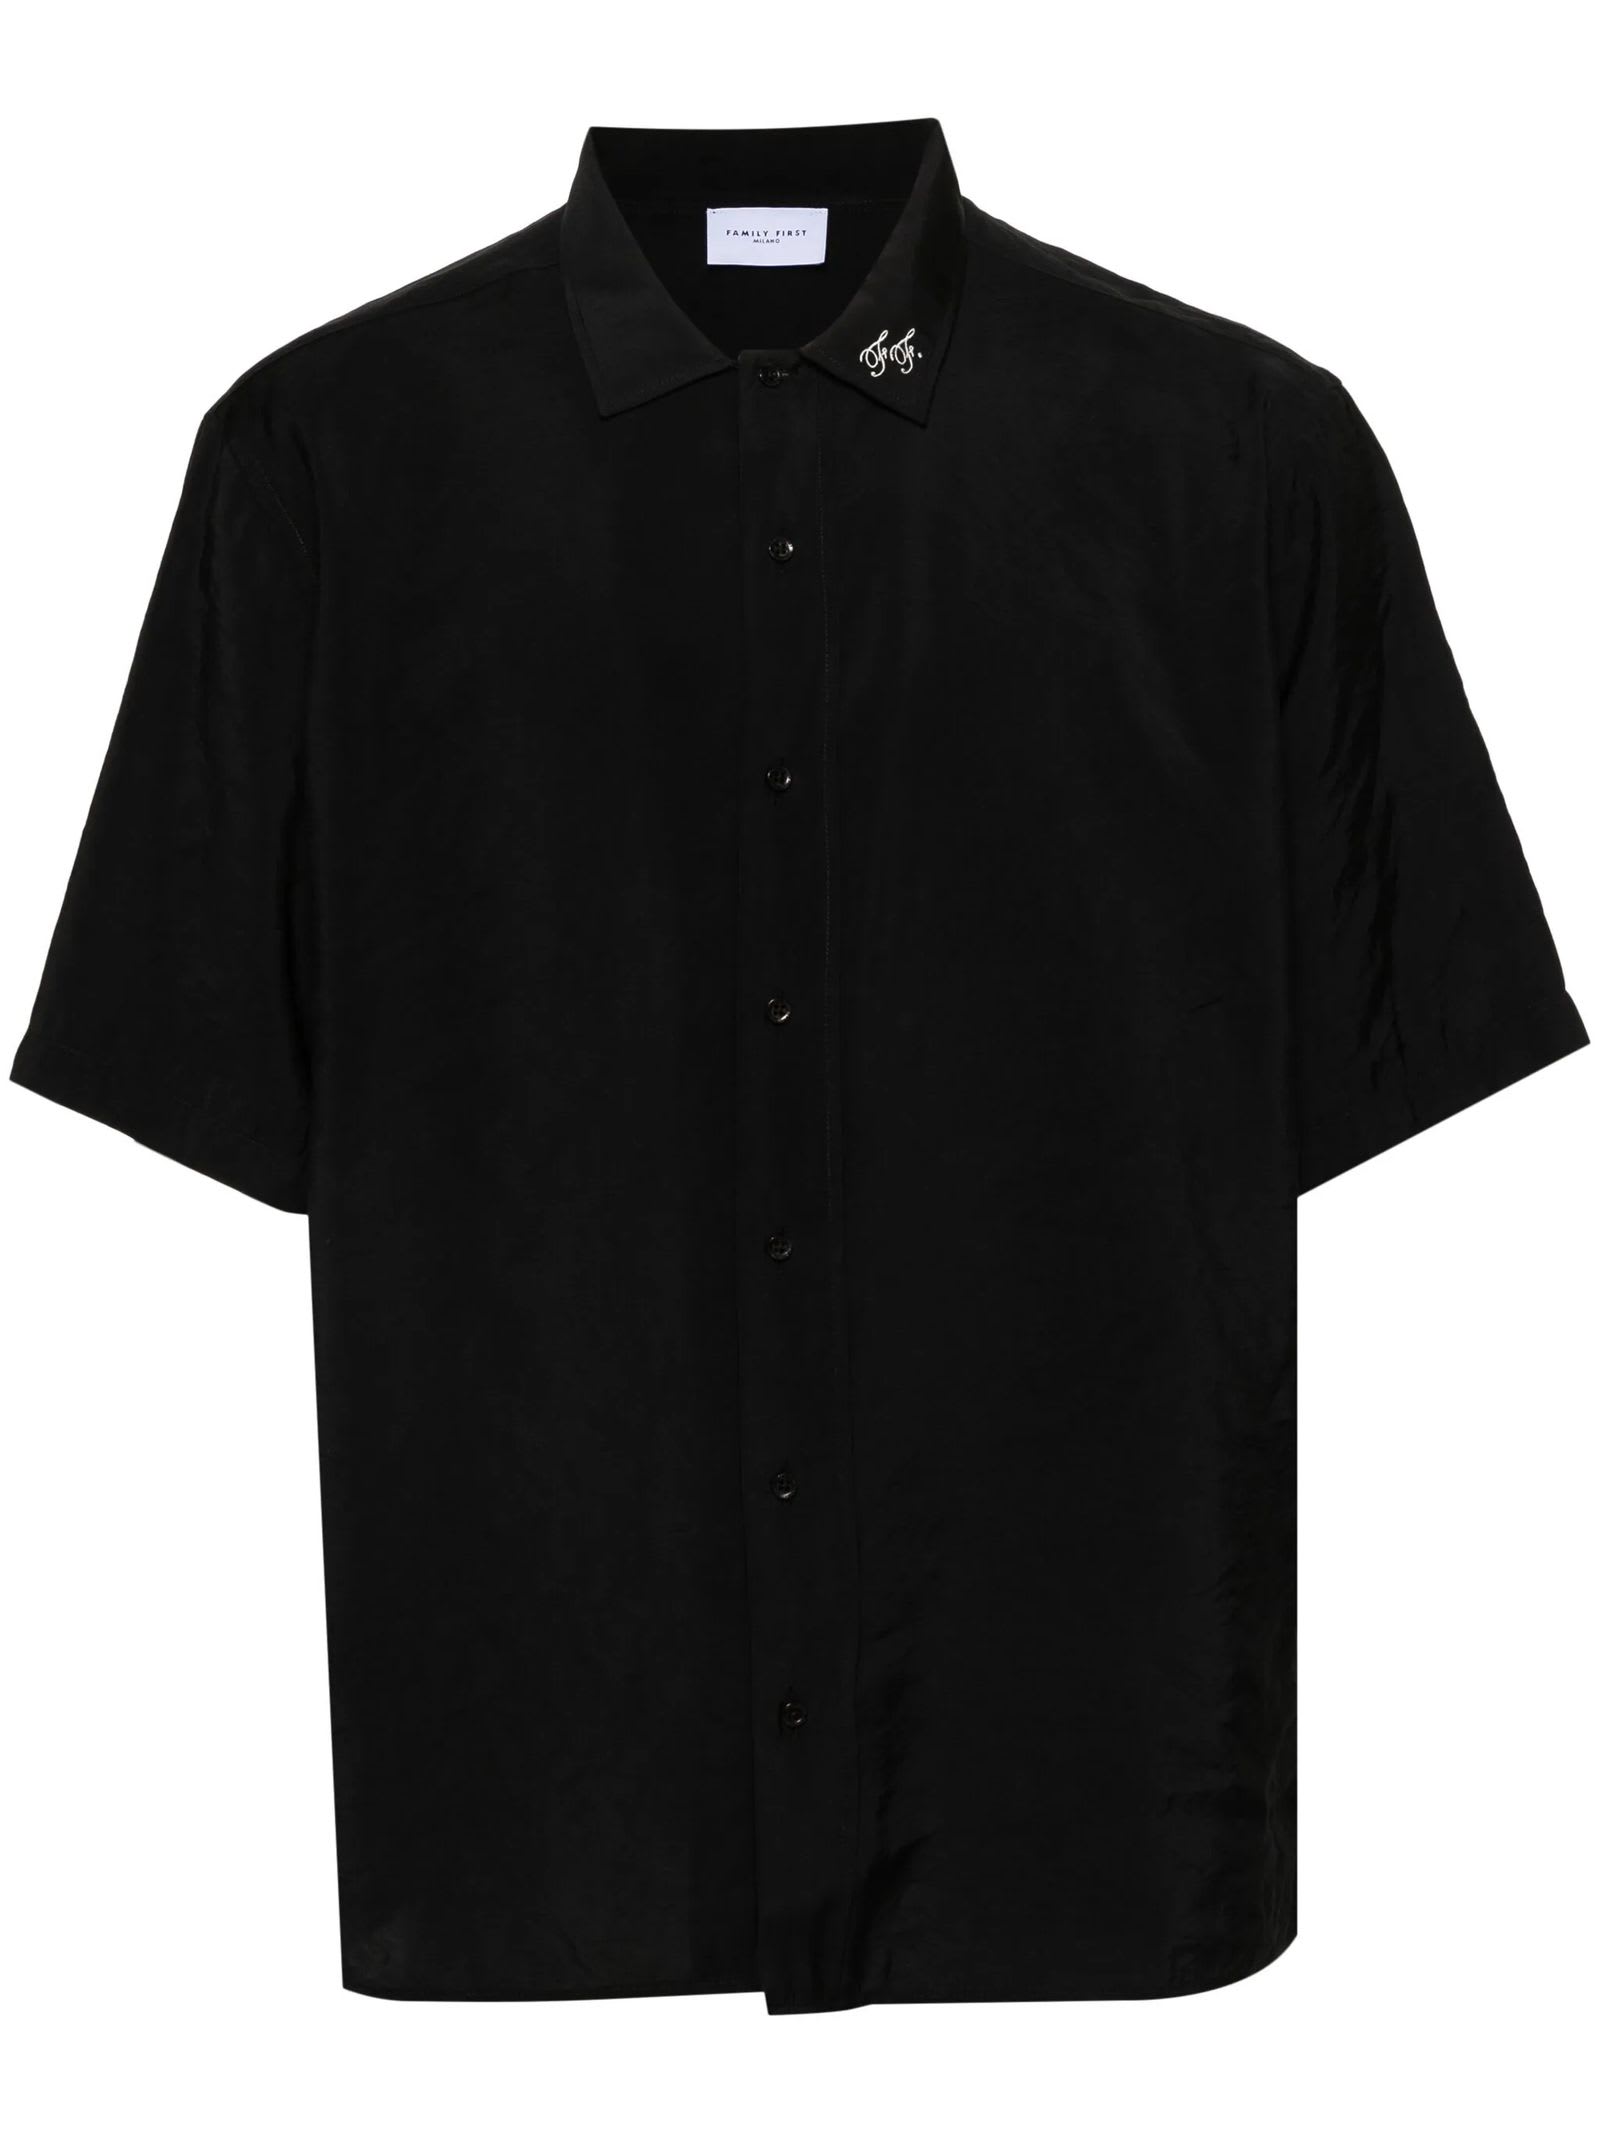 Shop Family First Milano Family First Shirts Black